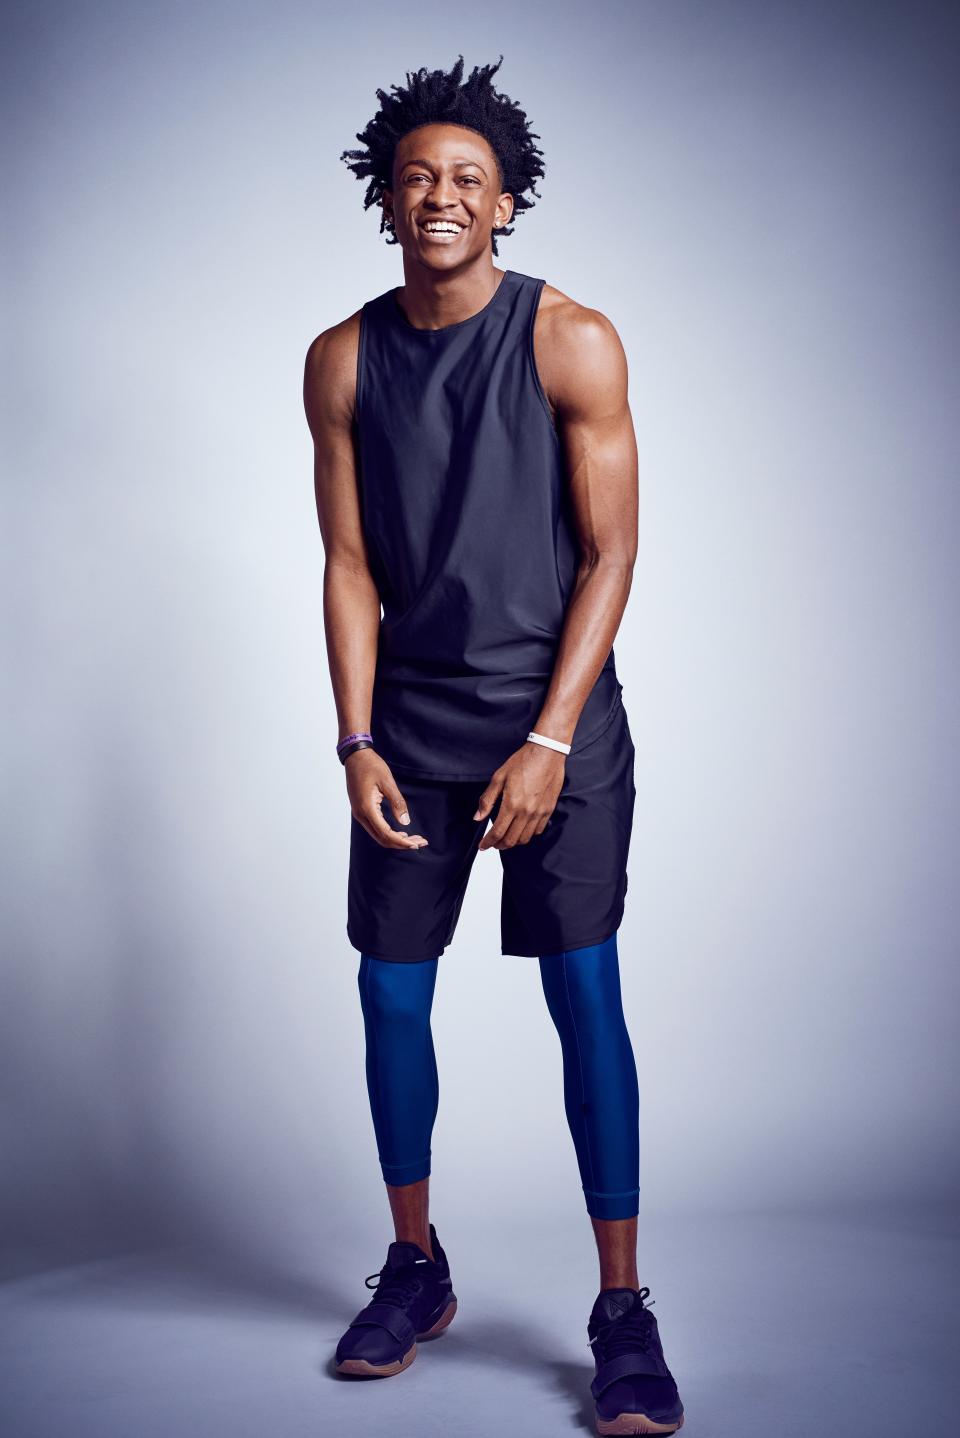 Tank top, $92, shorts, $108, and tights, $124, by STLR. Sneakers, $110, by Nike.